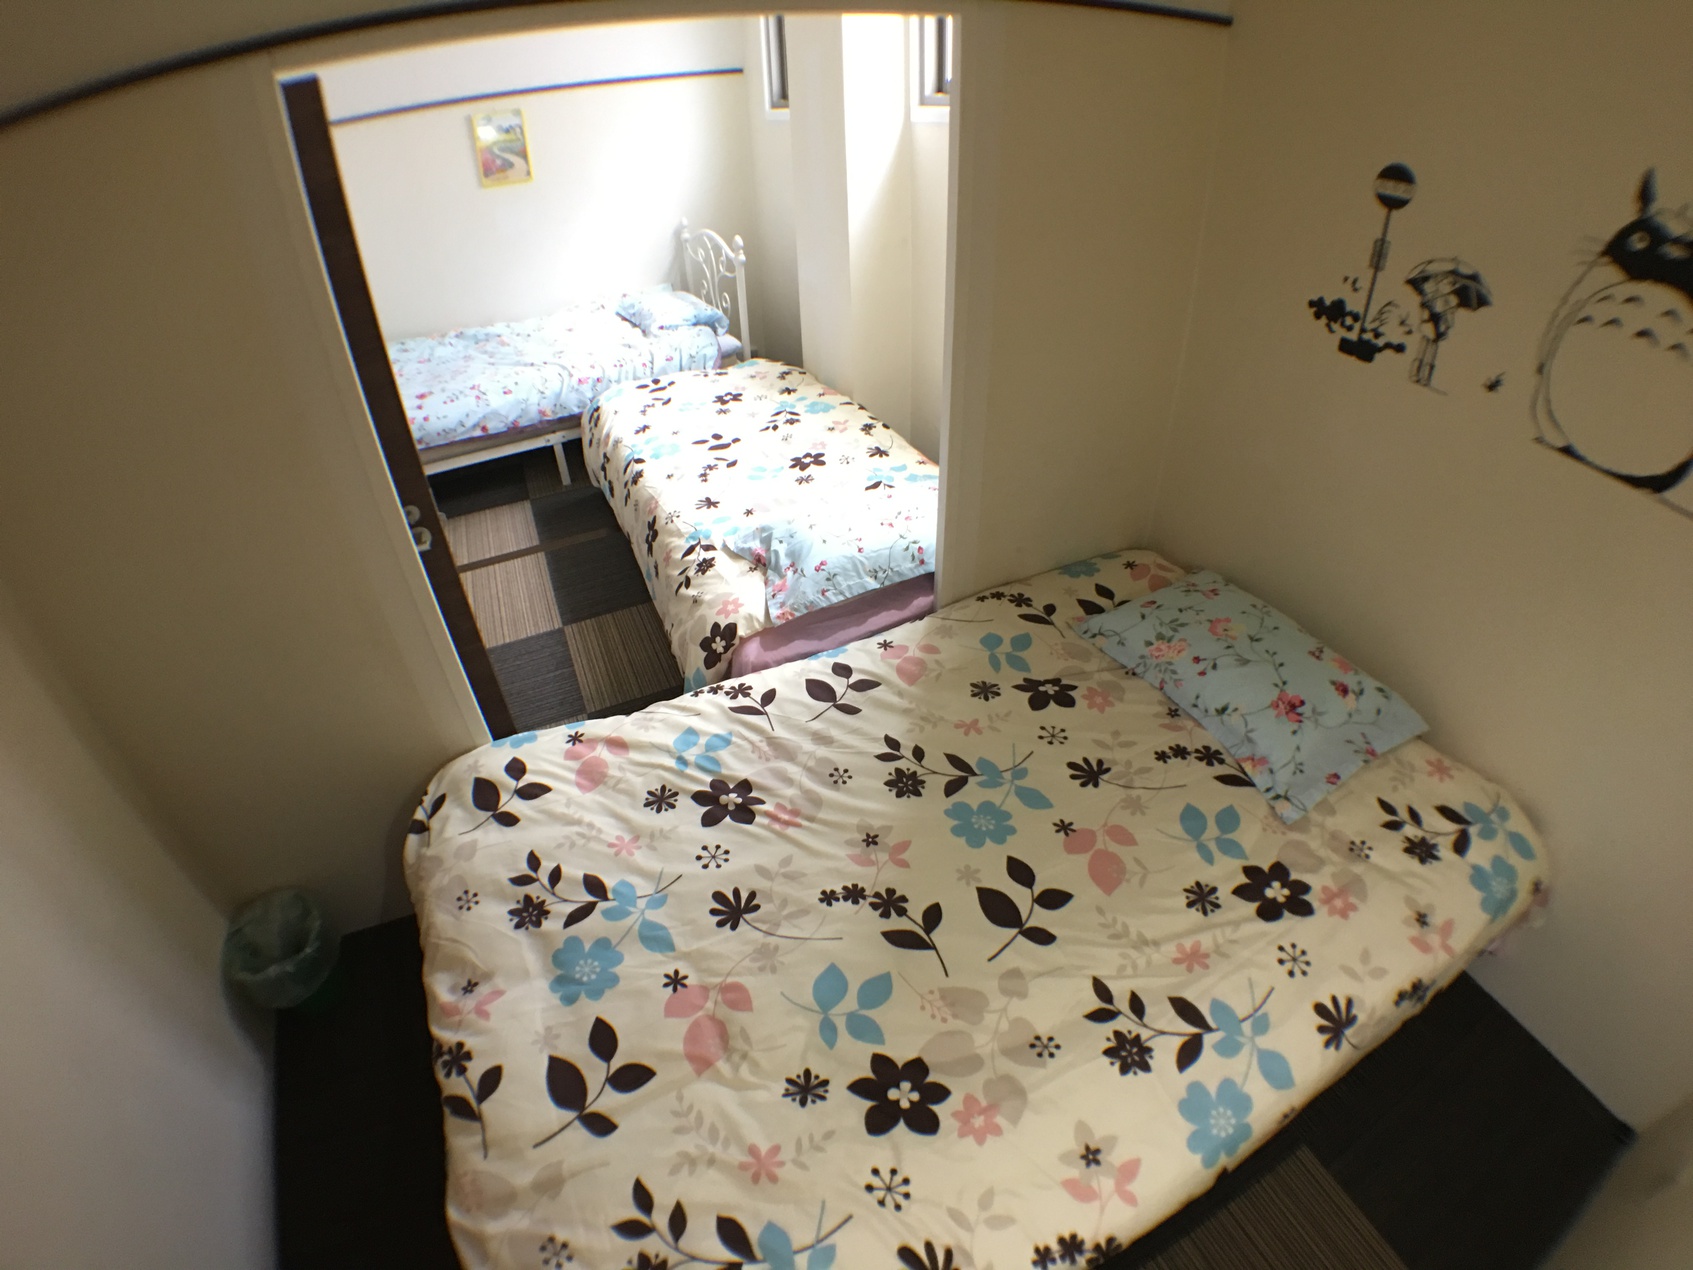 Guest House Sakaihigashi Nikoniko The -1-star Guest House Sakaihigashi Nikoniko offers comfort and convenience whether youre on business or holiday in Osaka. The property offers guests a range of services and amenities designed to pr